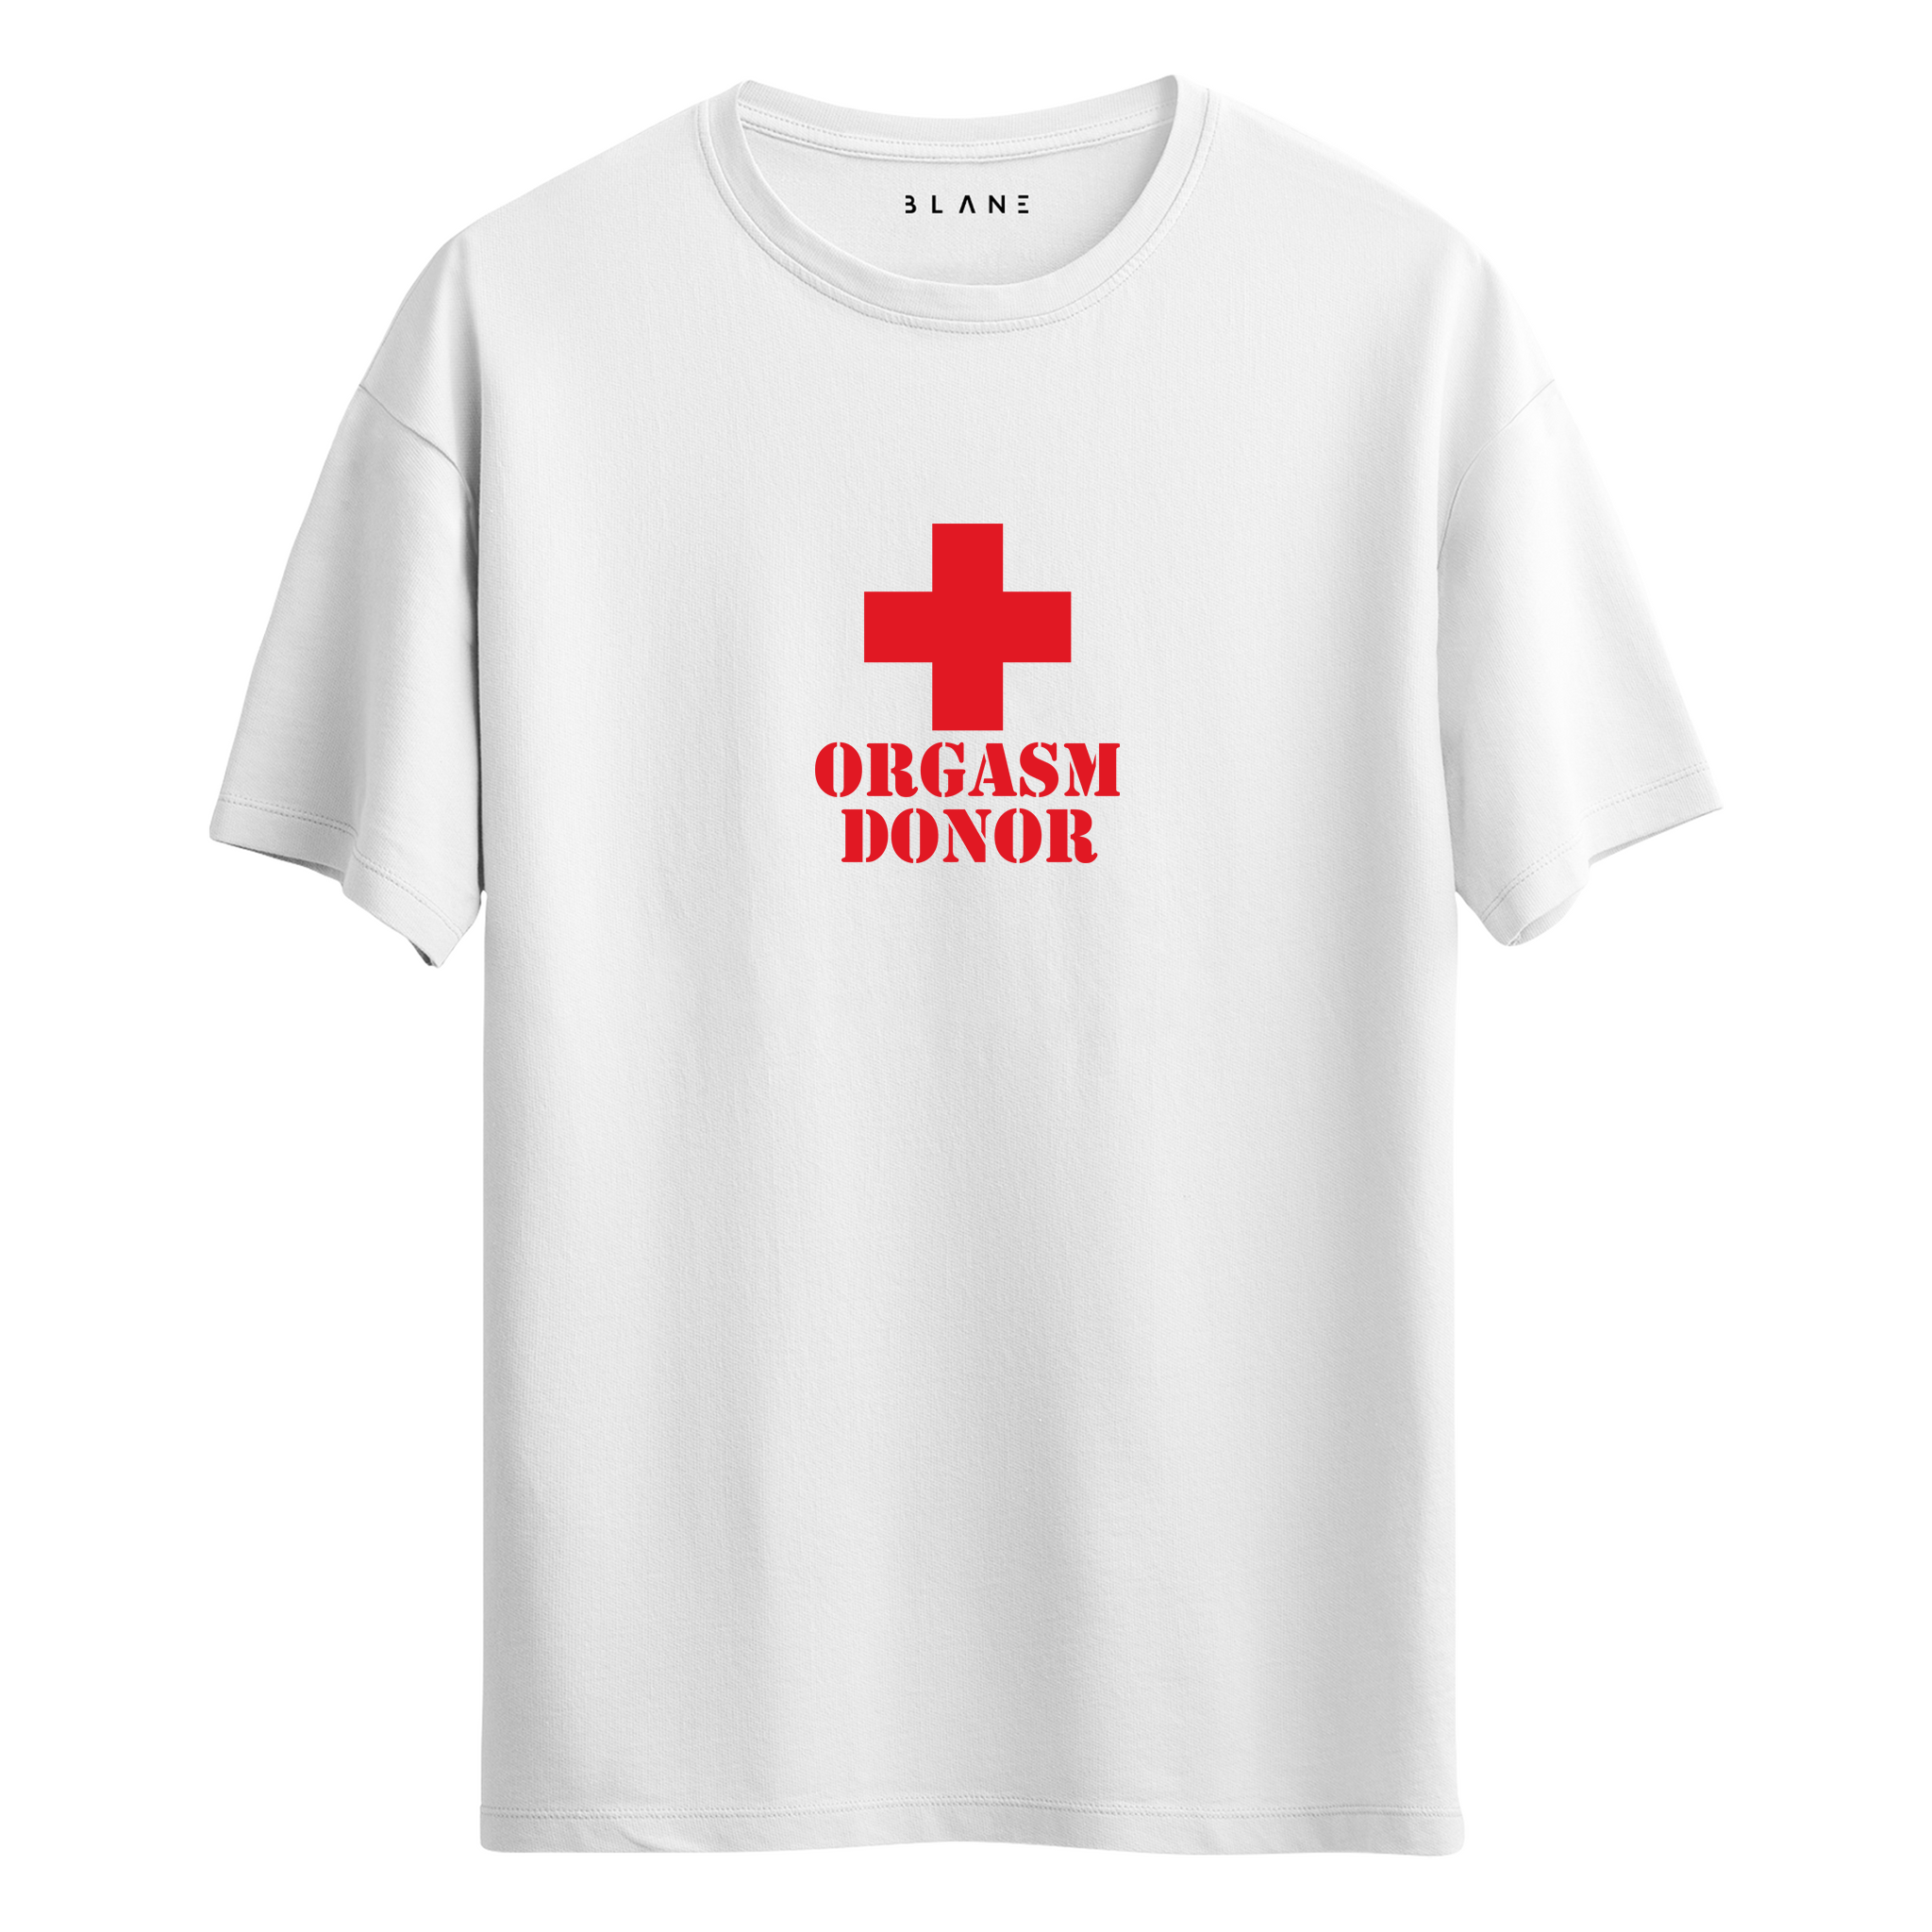 Donor - T-Shirt